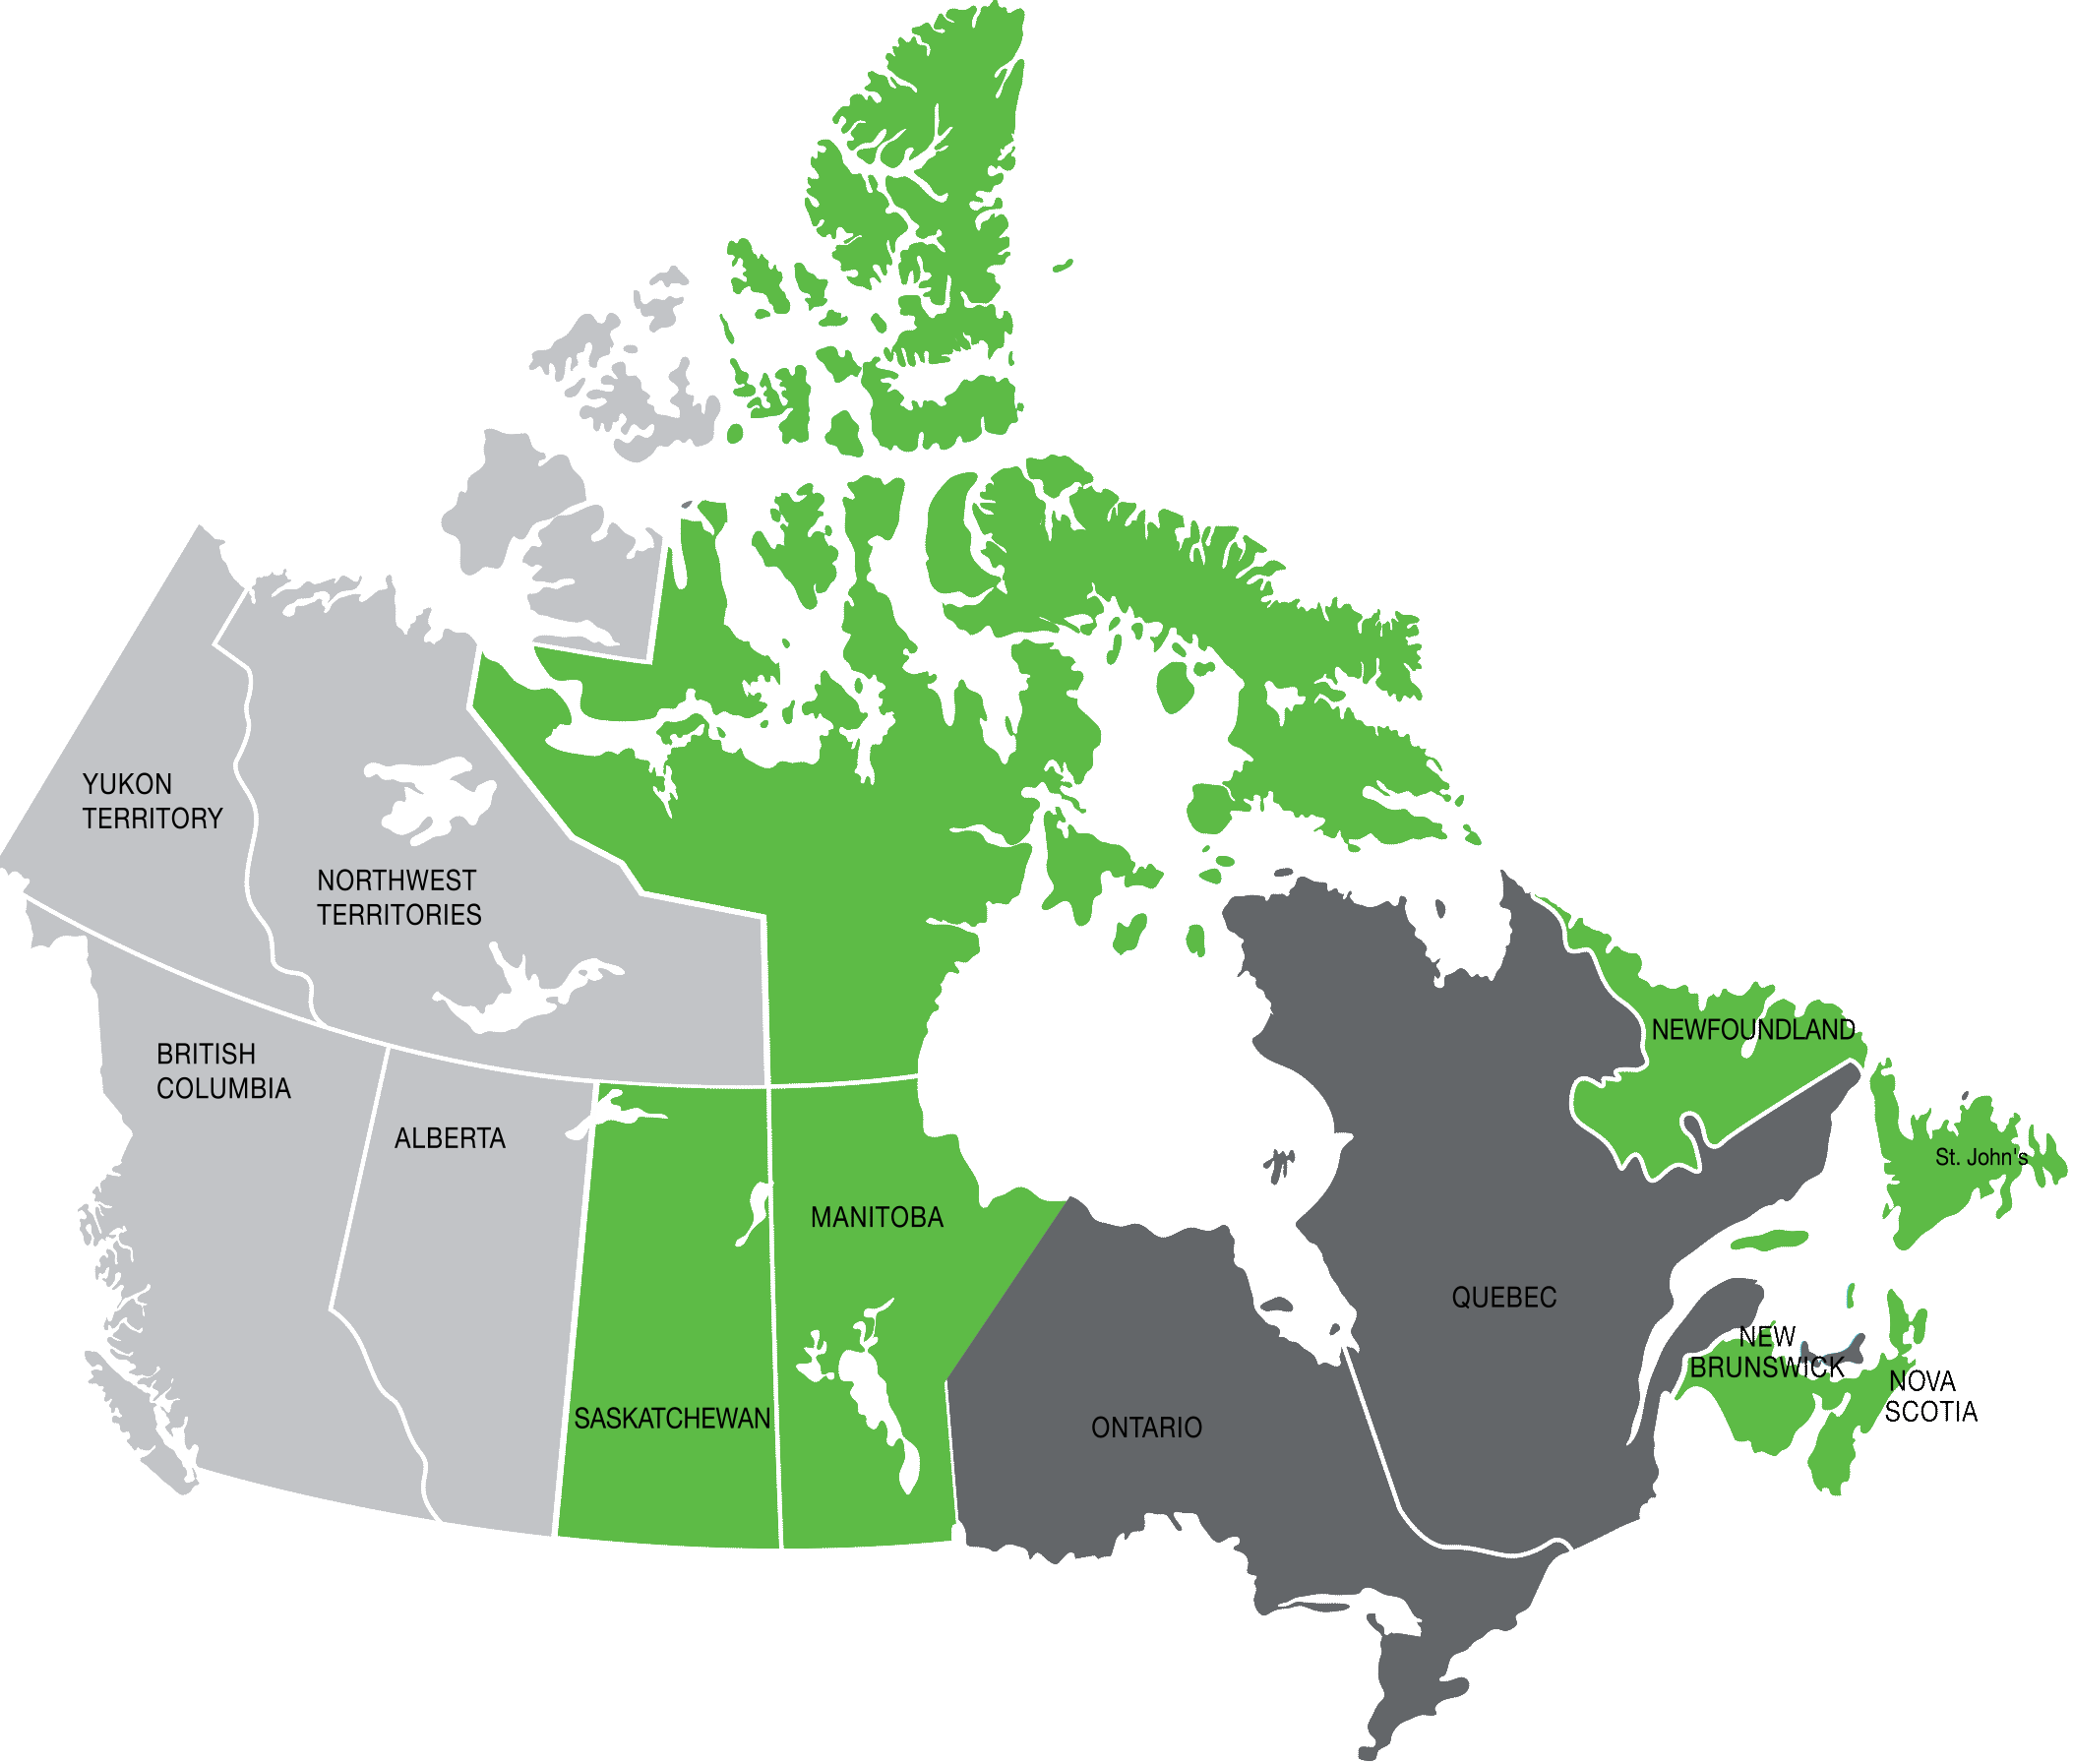 Spx Flow Sales Contacts - Minimum Wage Canada 2018 (2107x1793)